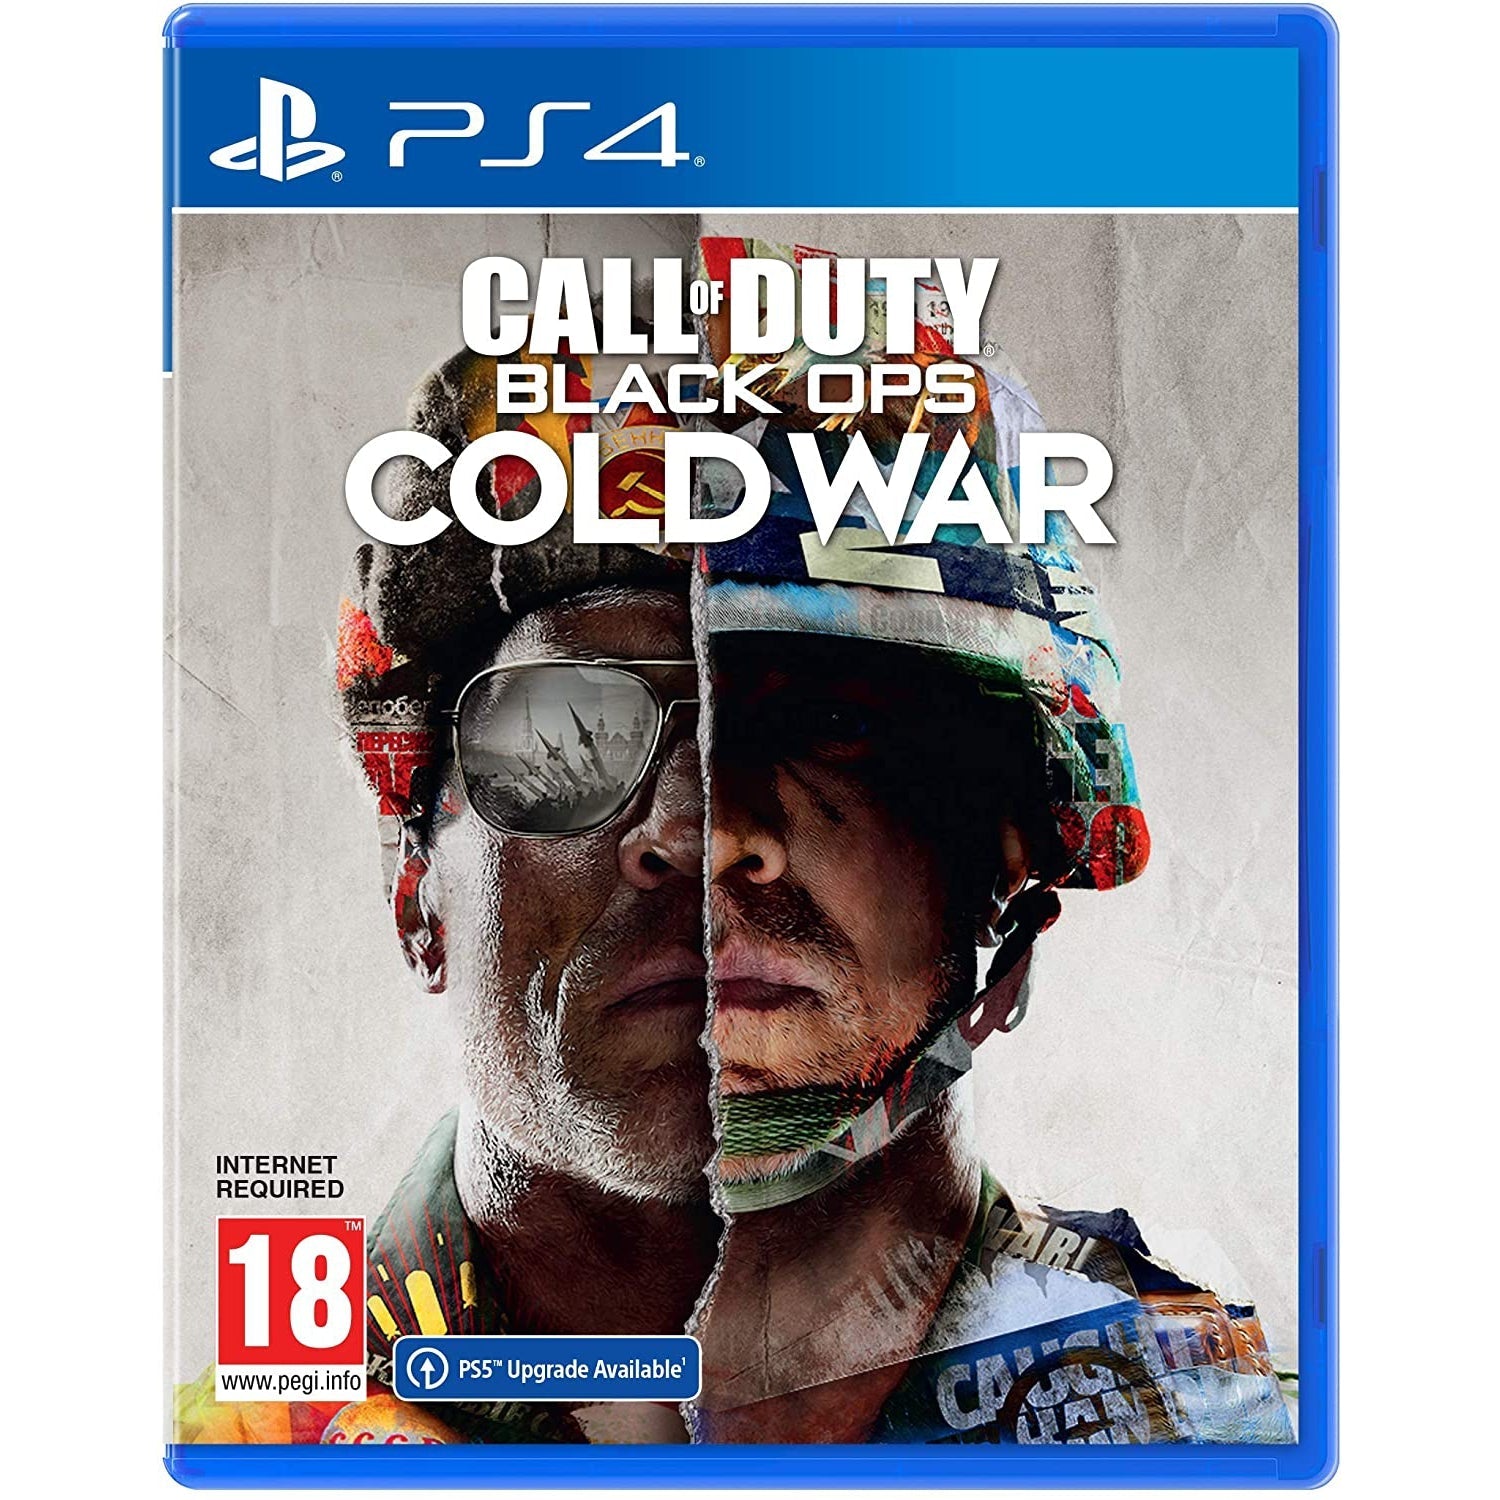 Call of Duty: Black Ops Cold War (PS4) - New